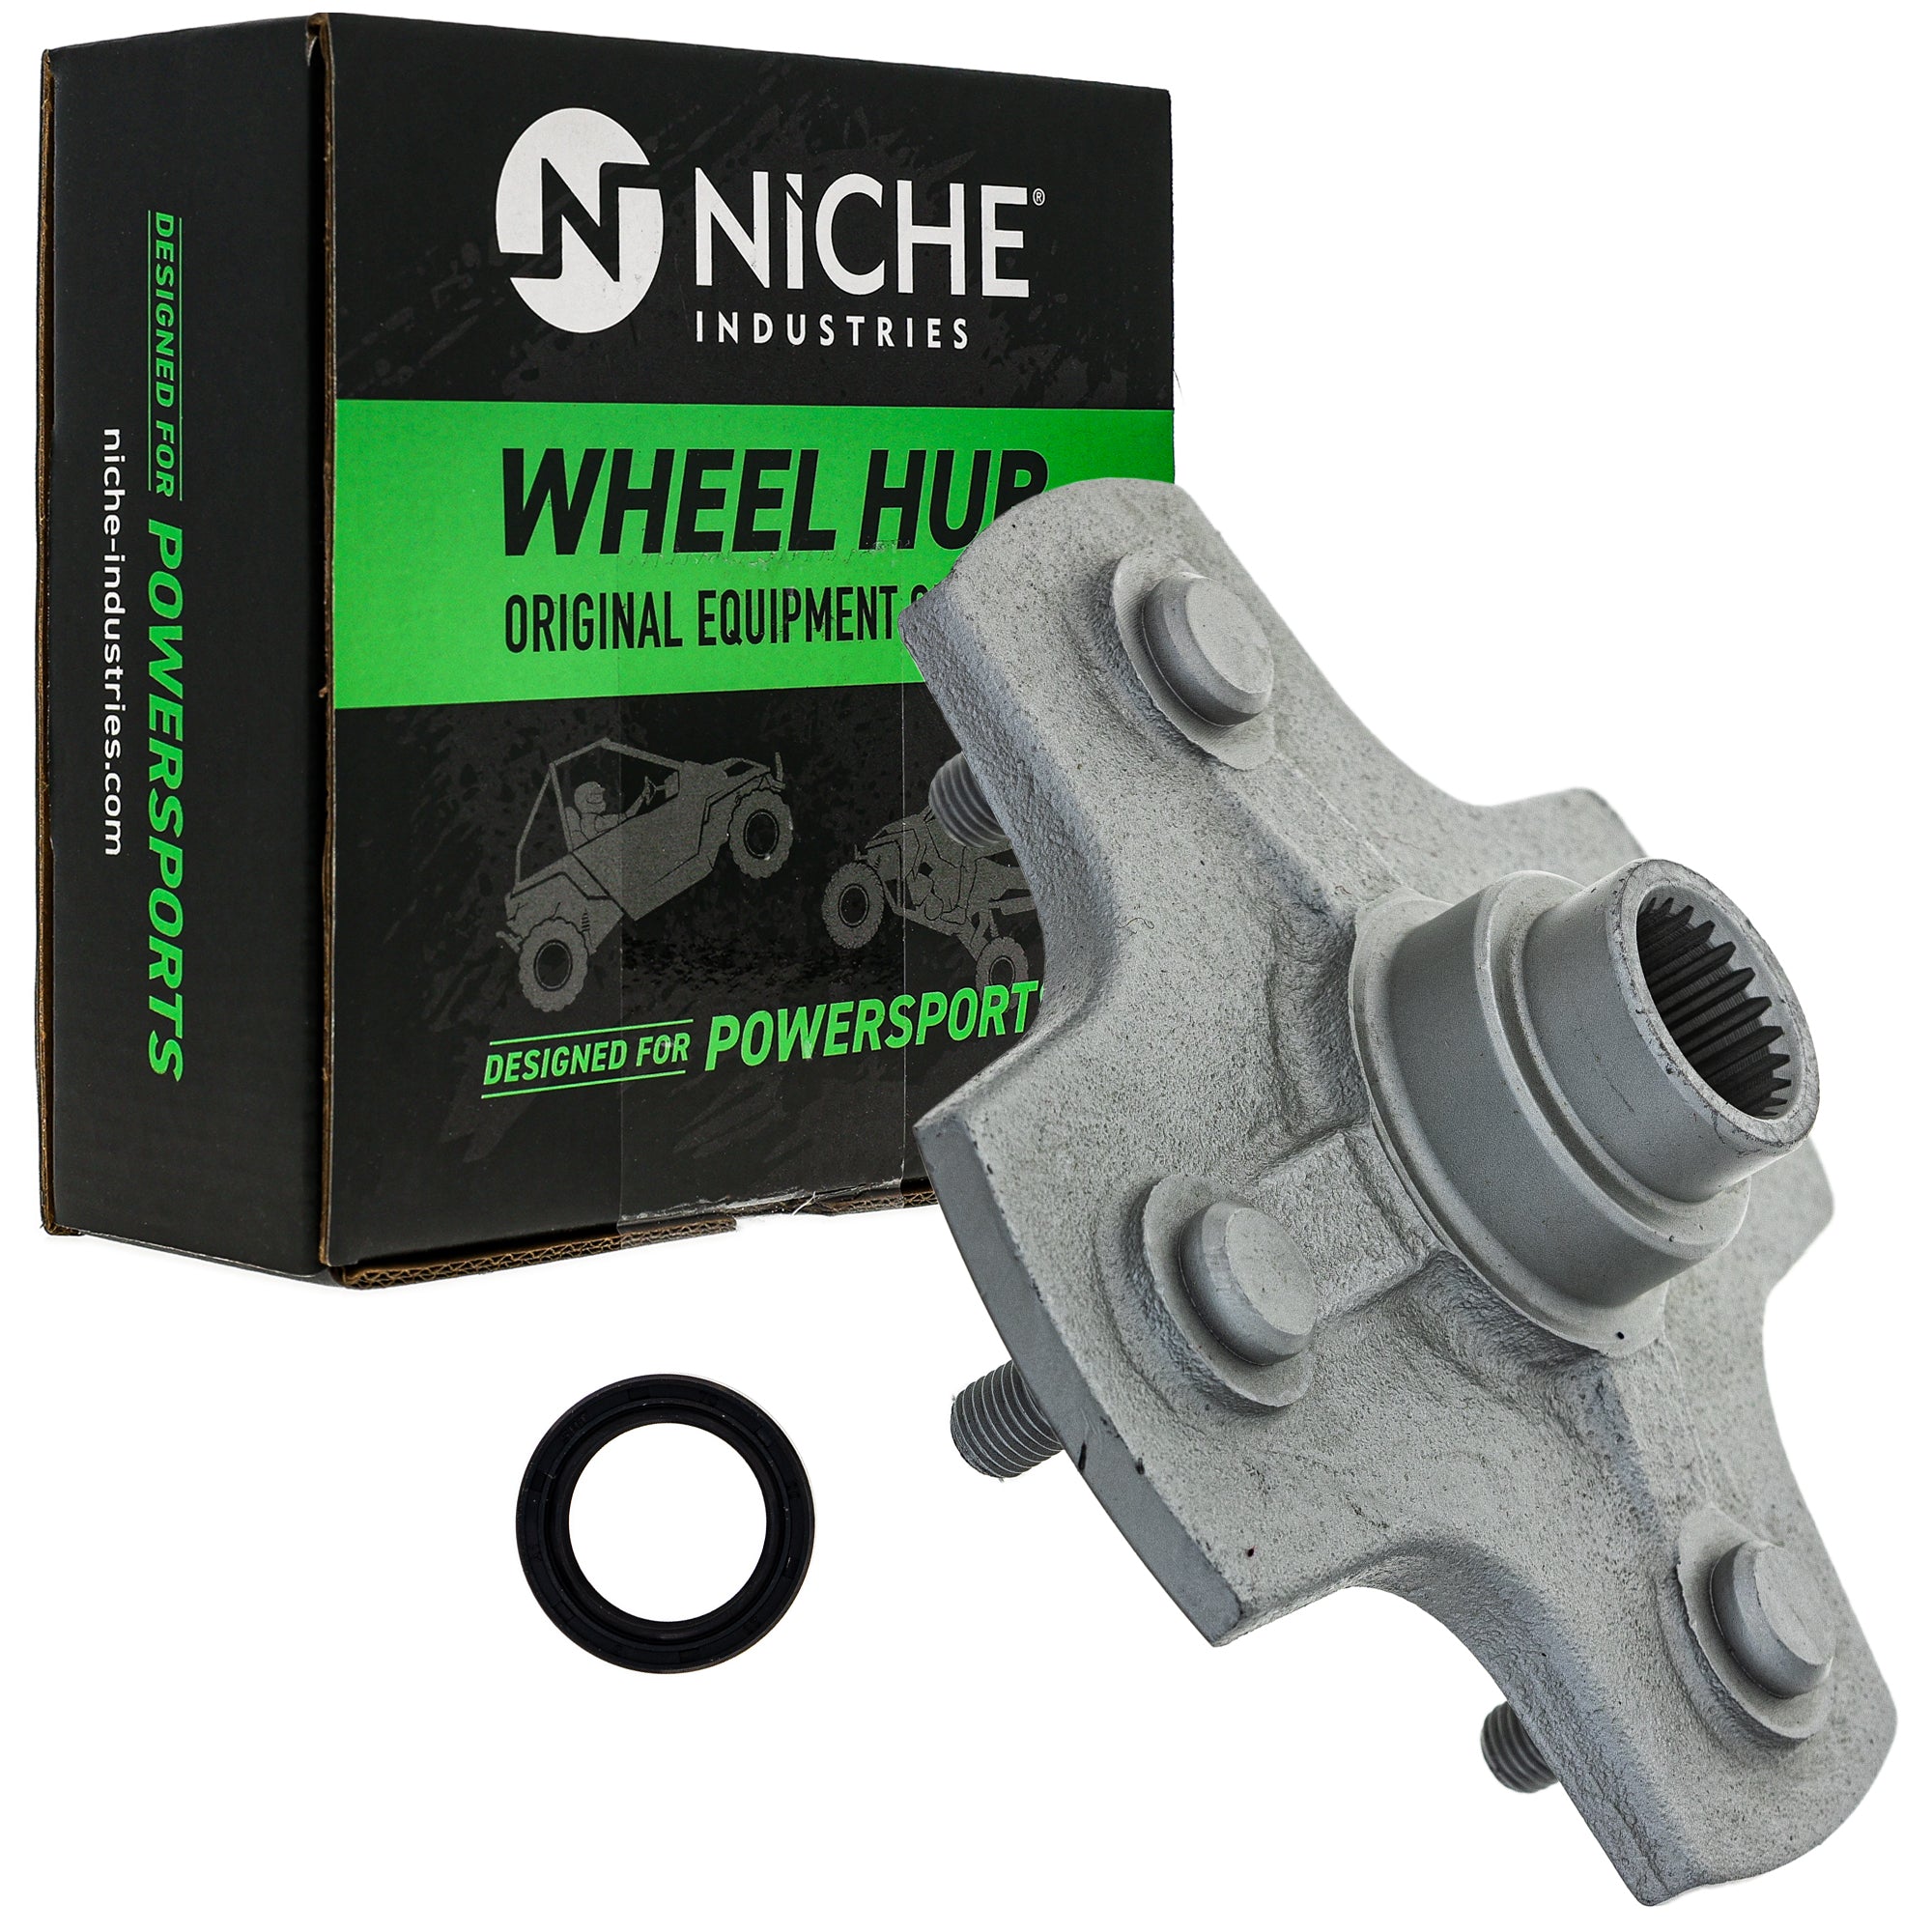 NICHE 519-CWH-2226B Wheel Hub for zOTHER FourTrax